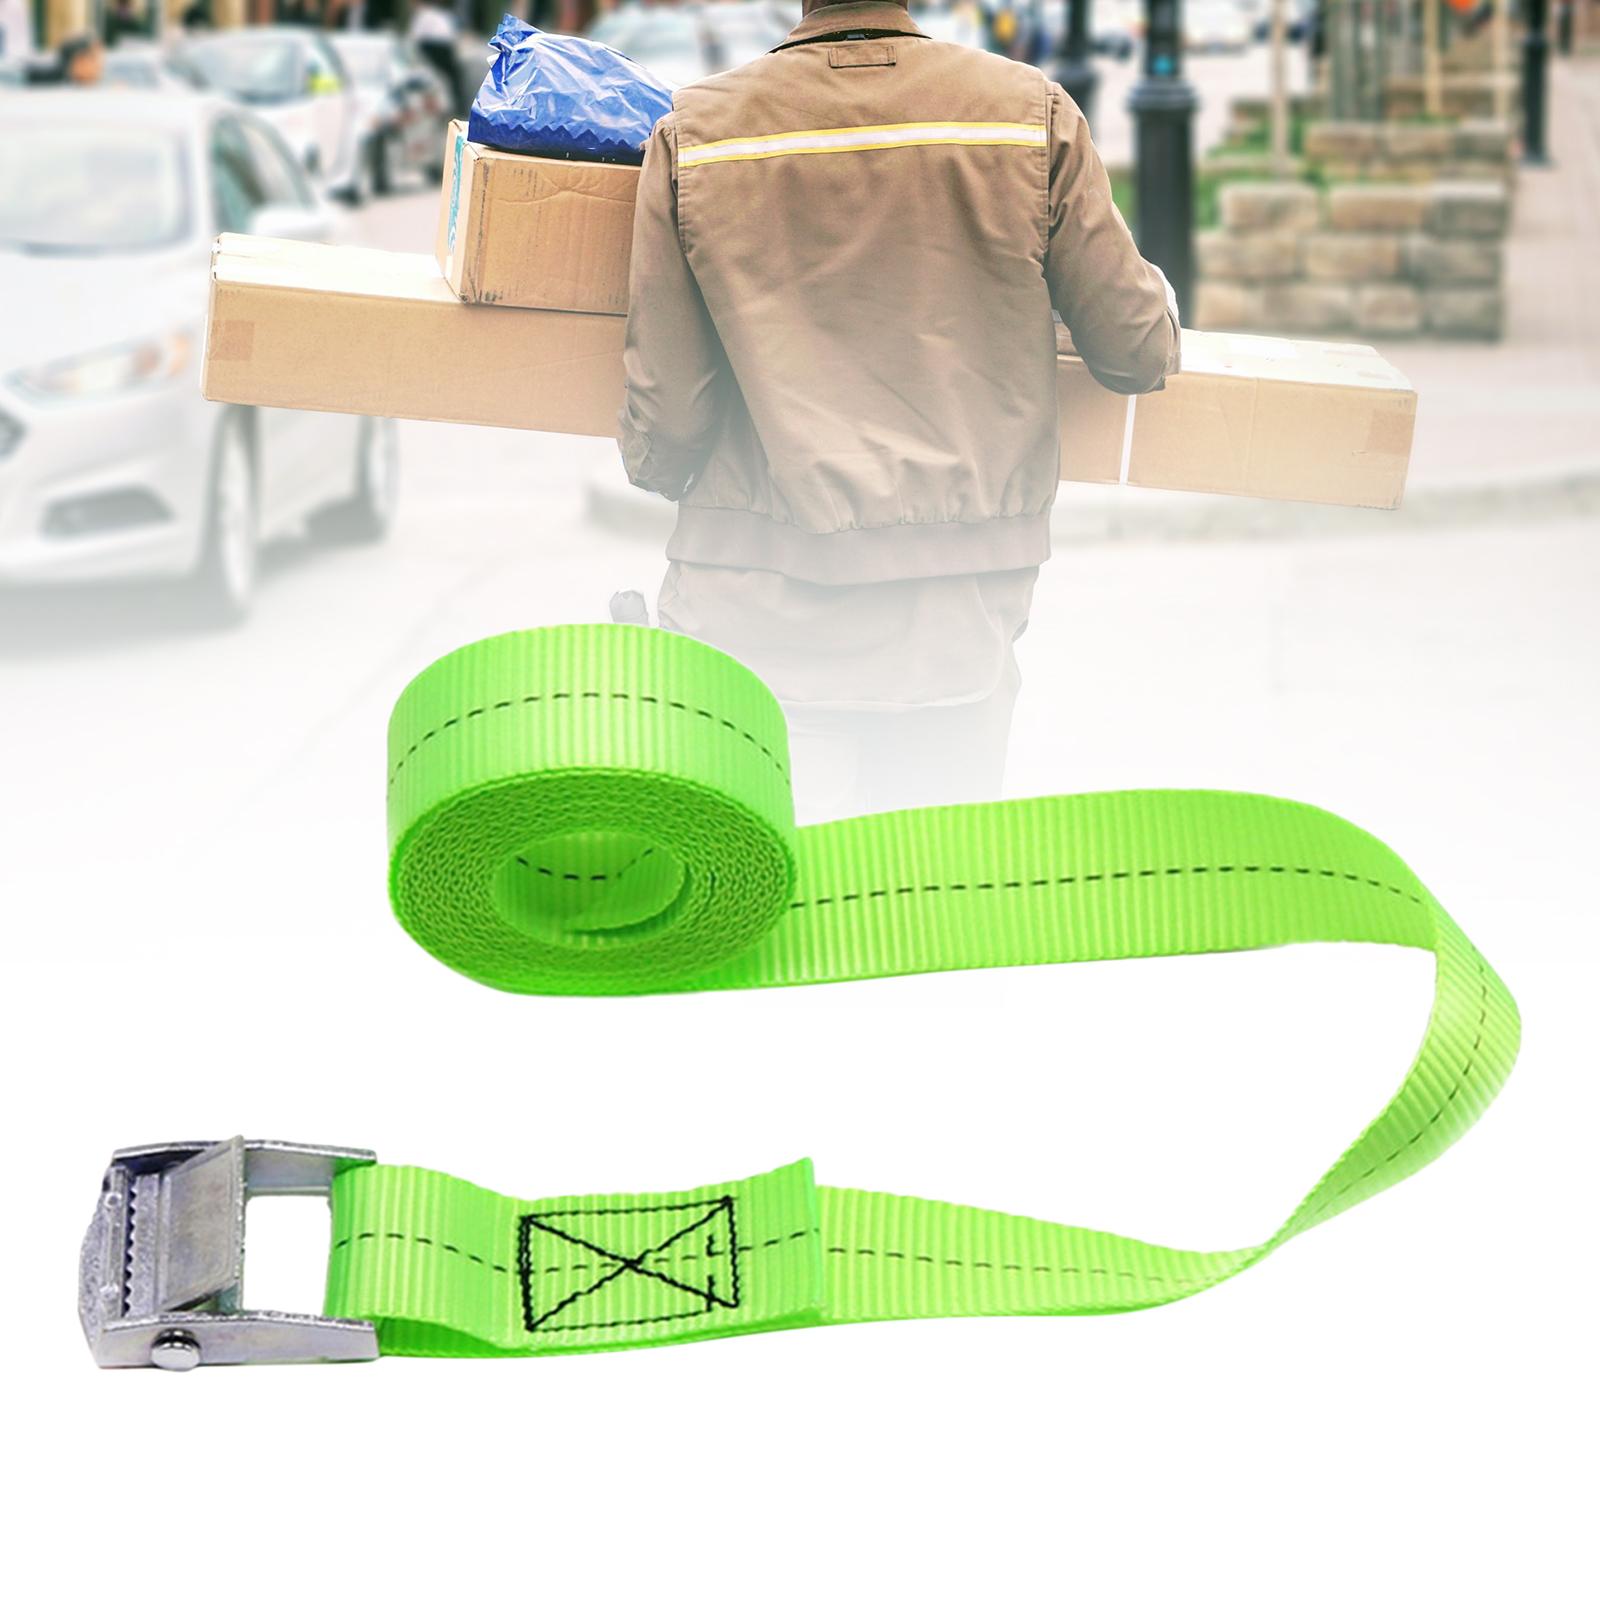 Luggage Strap Travel Luminous Lashing Straps for Traveling Outdoor Trips 78.7inch